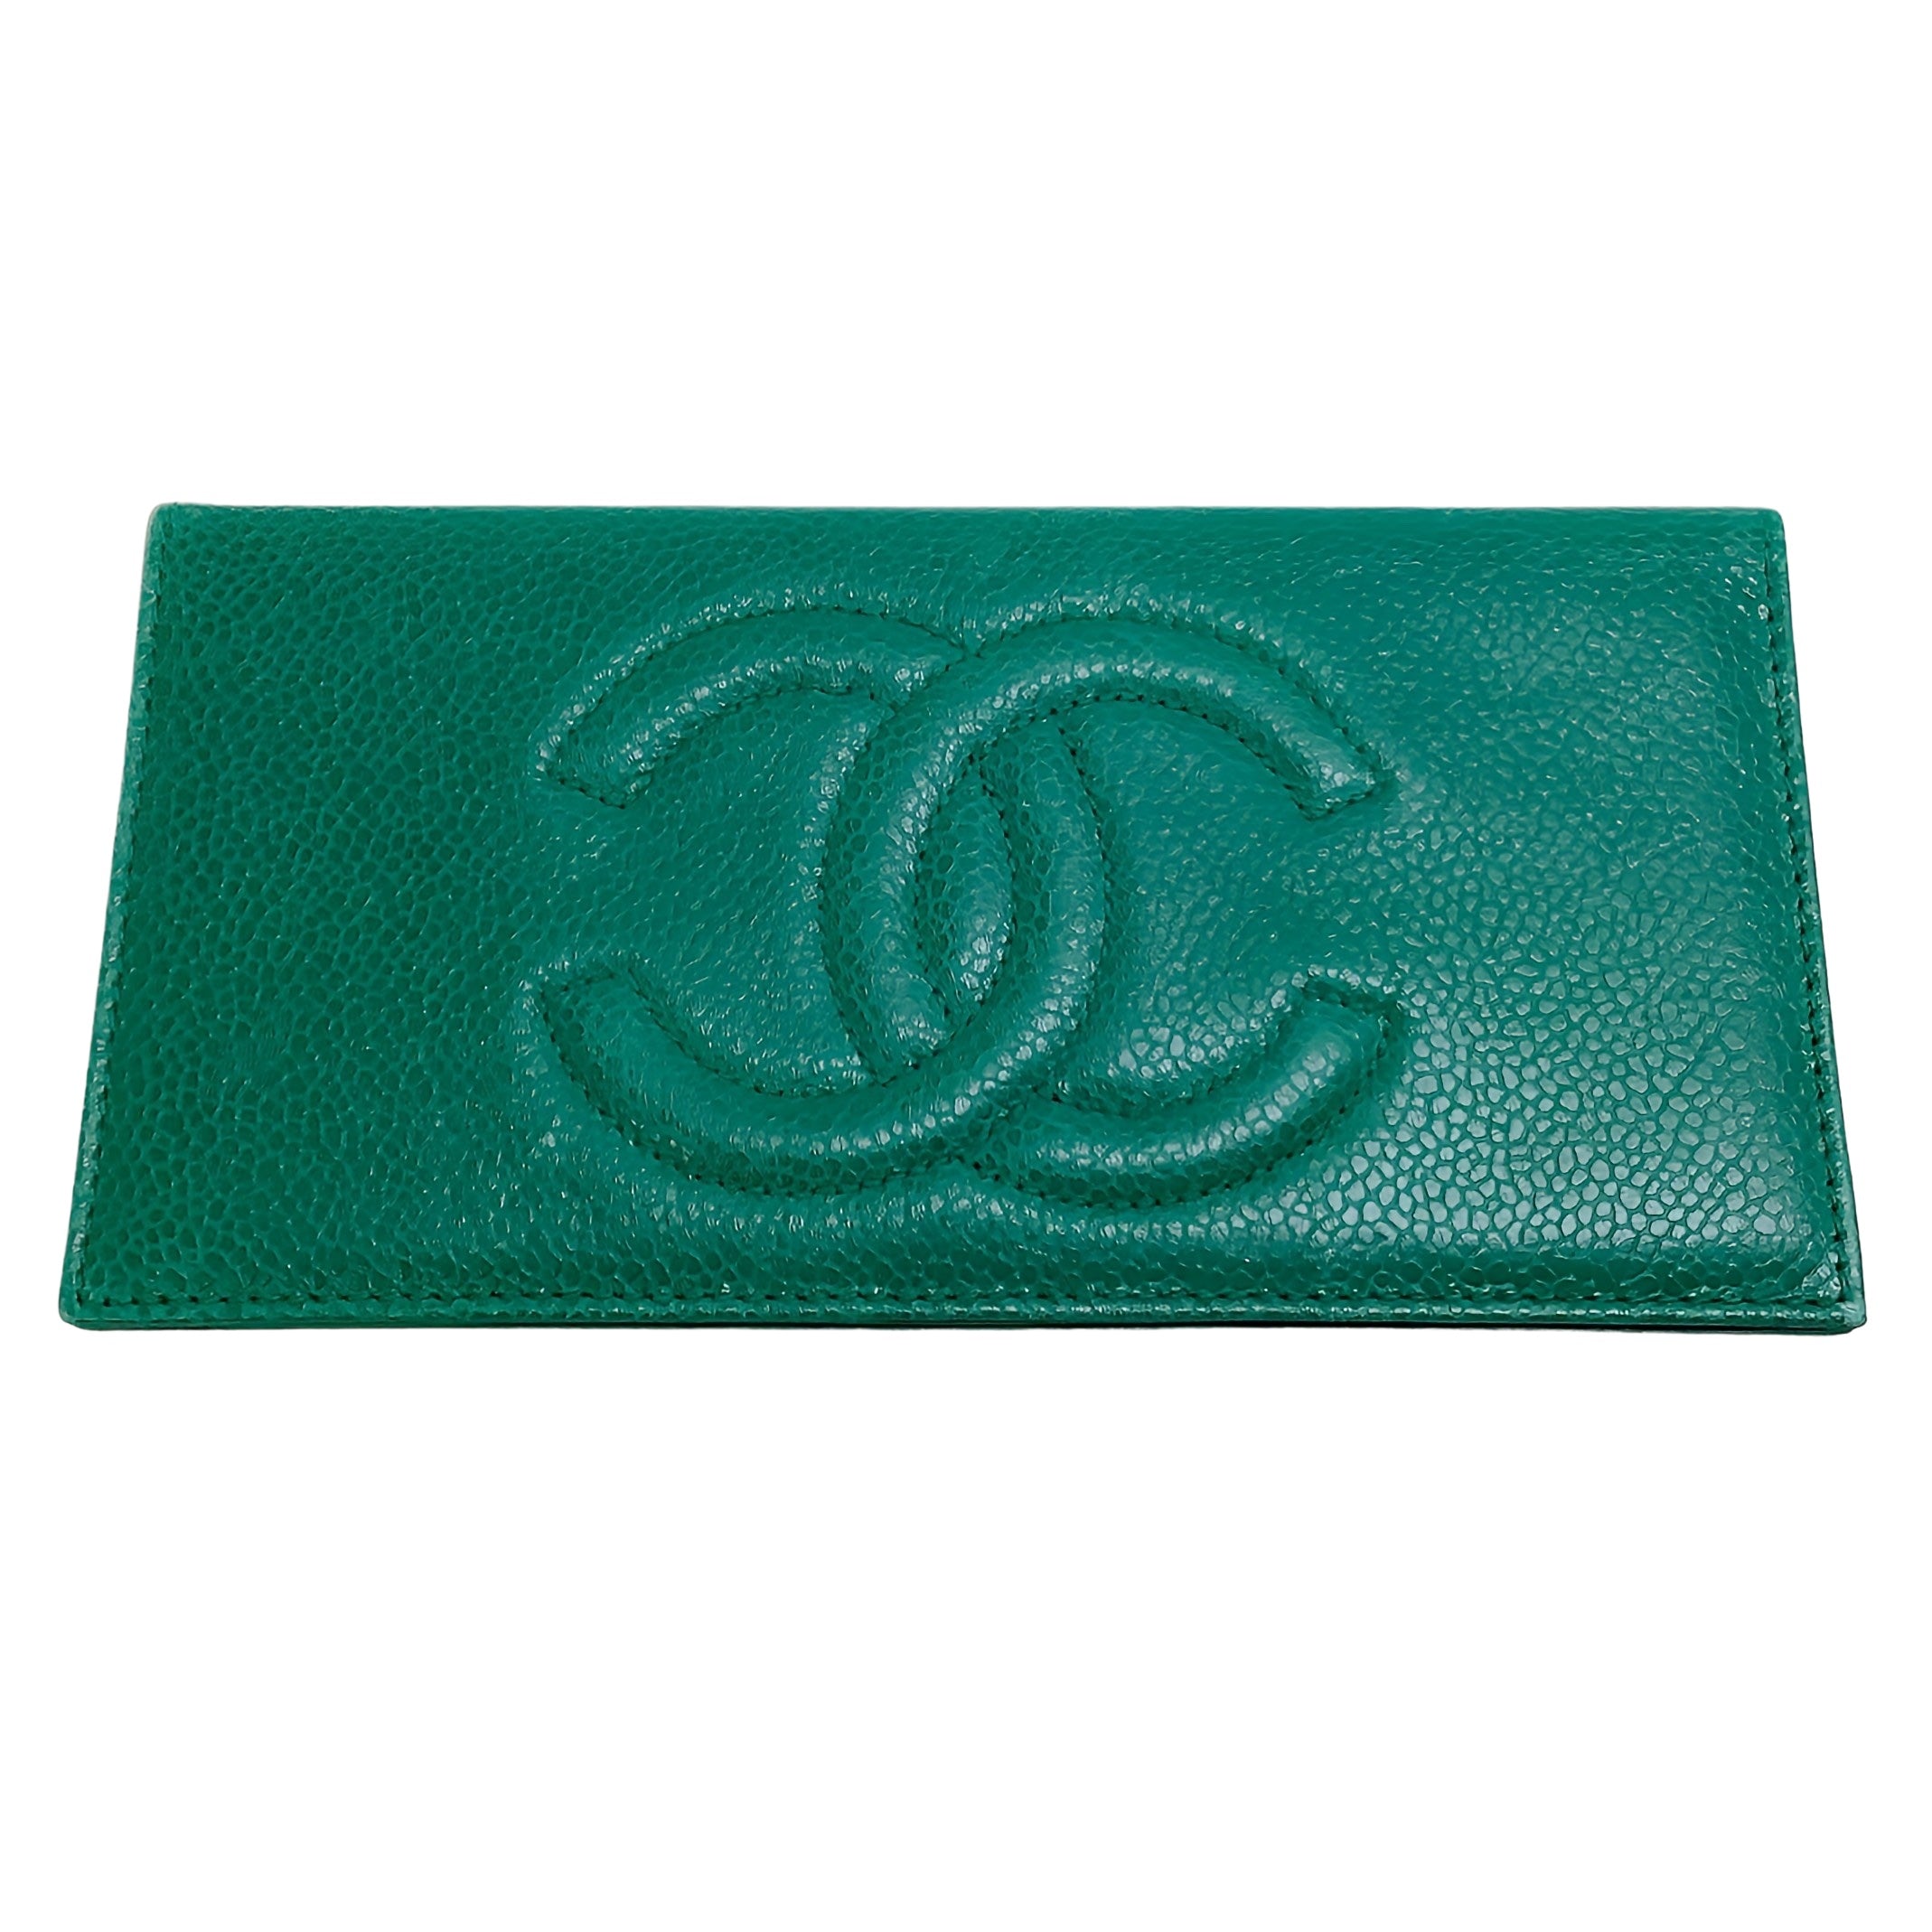 Chanel Emerald Green Leather Checkbook Cover Wallet